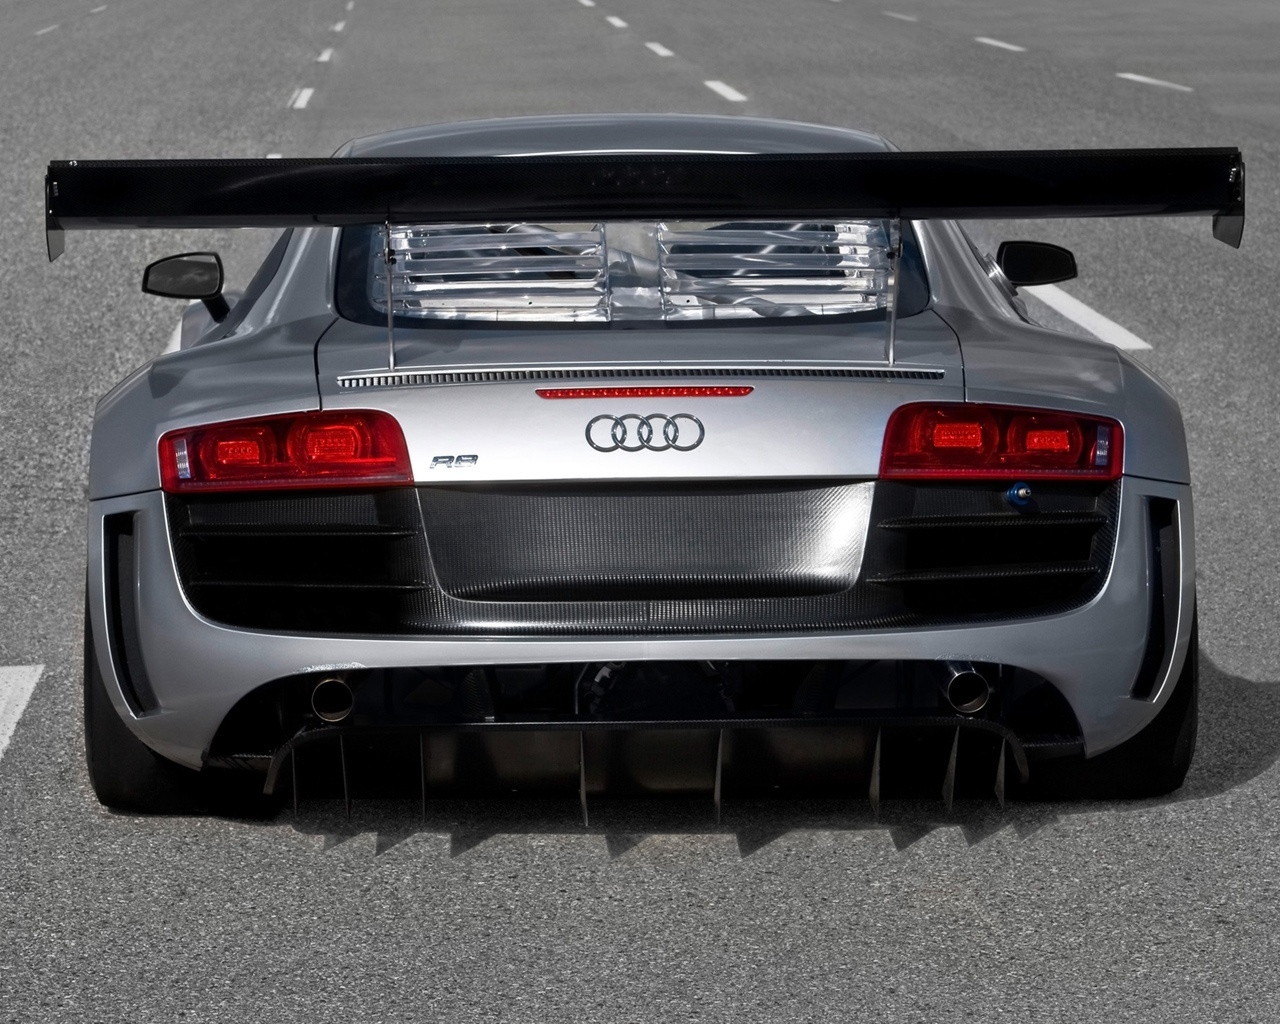 2009 Audi R8 GT3 - Rear for 1280 x 1024 resolution